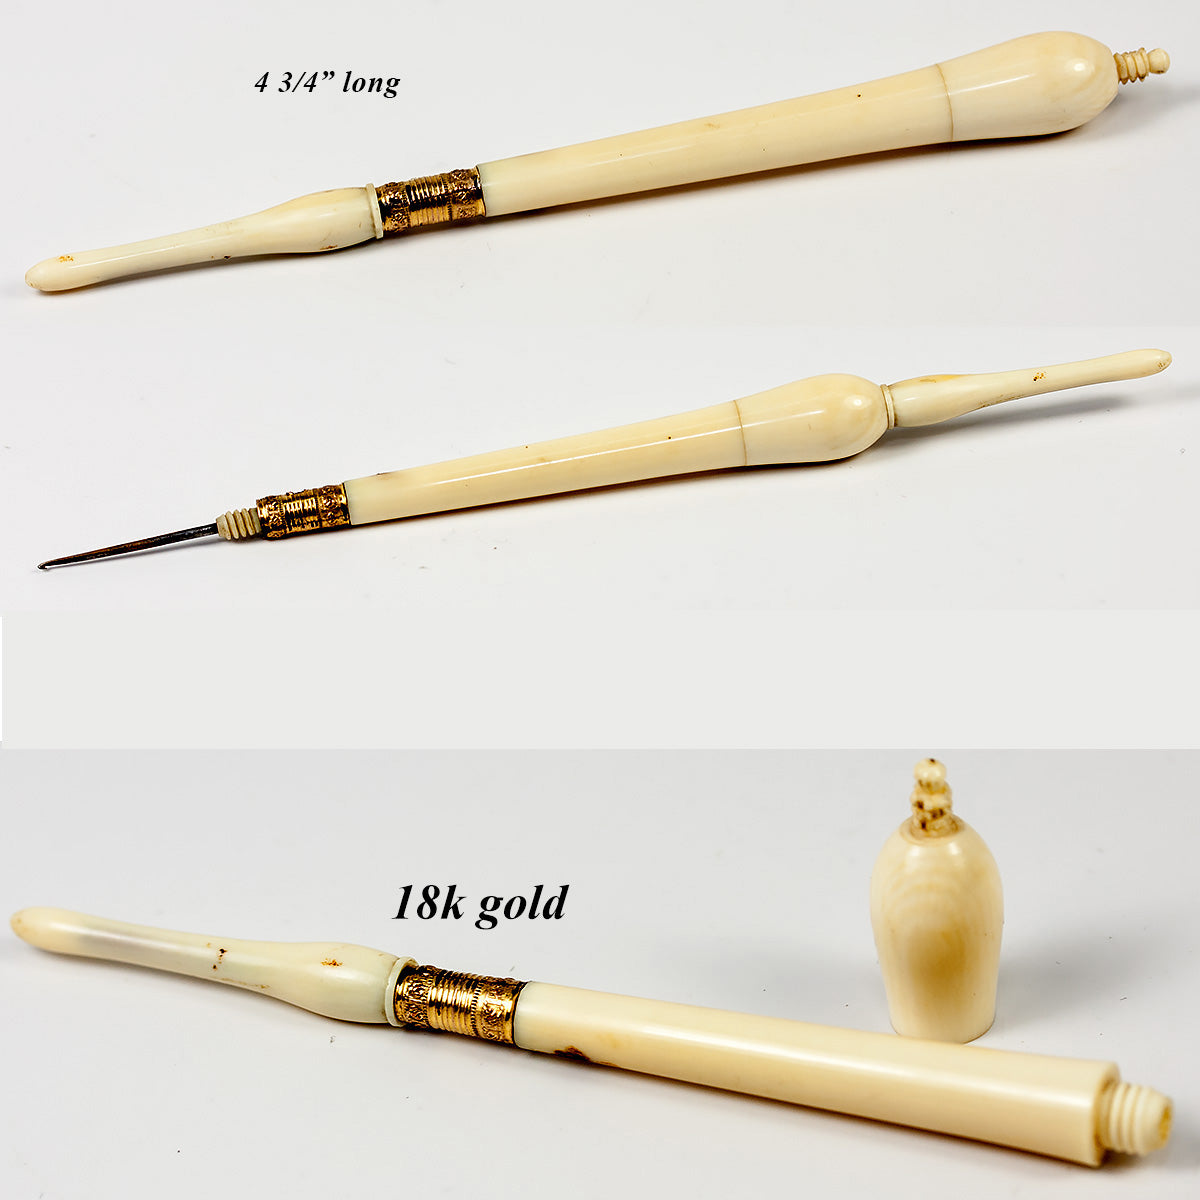 Antique Palais Royal Crochet Hook, Tambour, Ivory and 18k Gold Fitting, Self-encasing Case, Handle